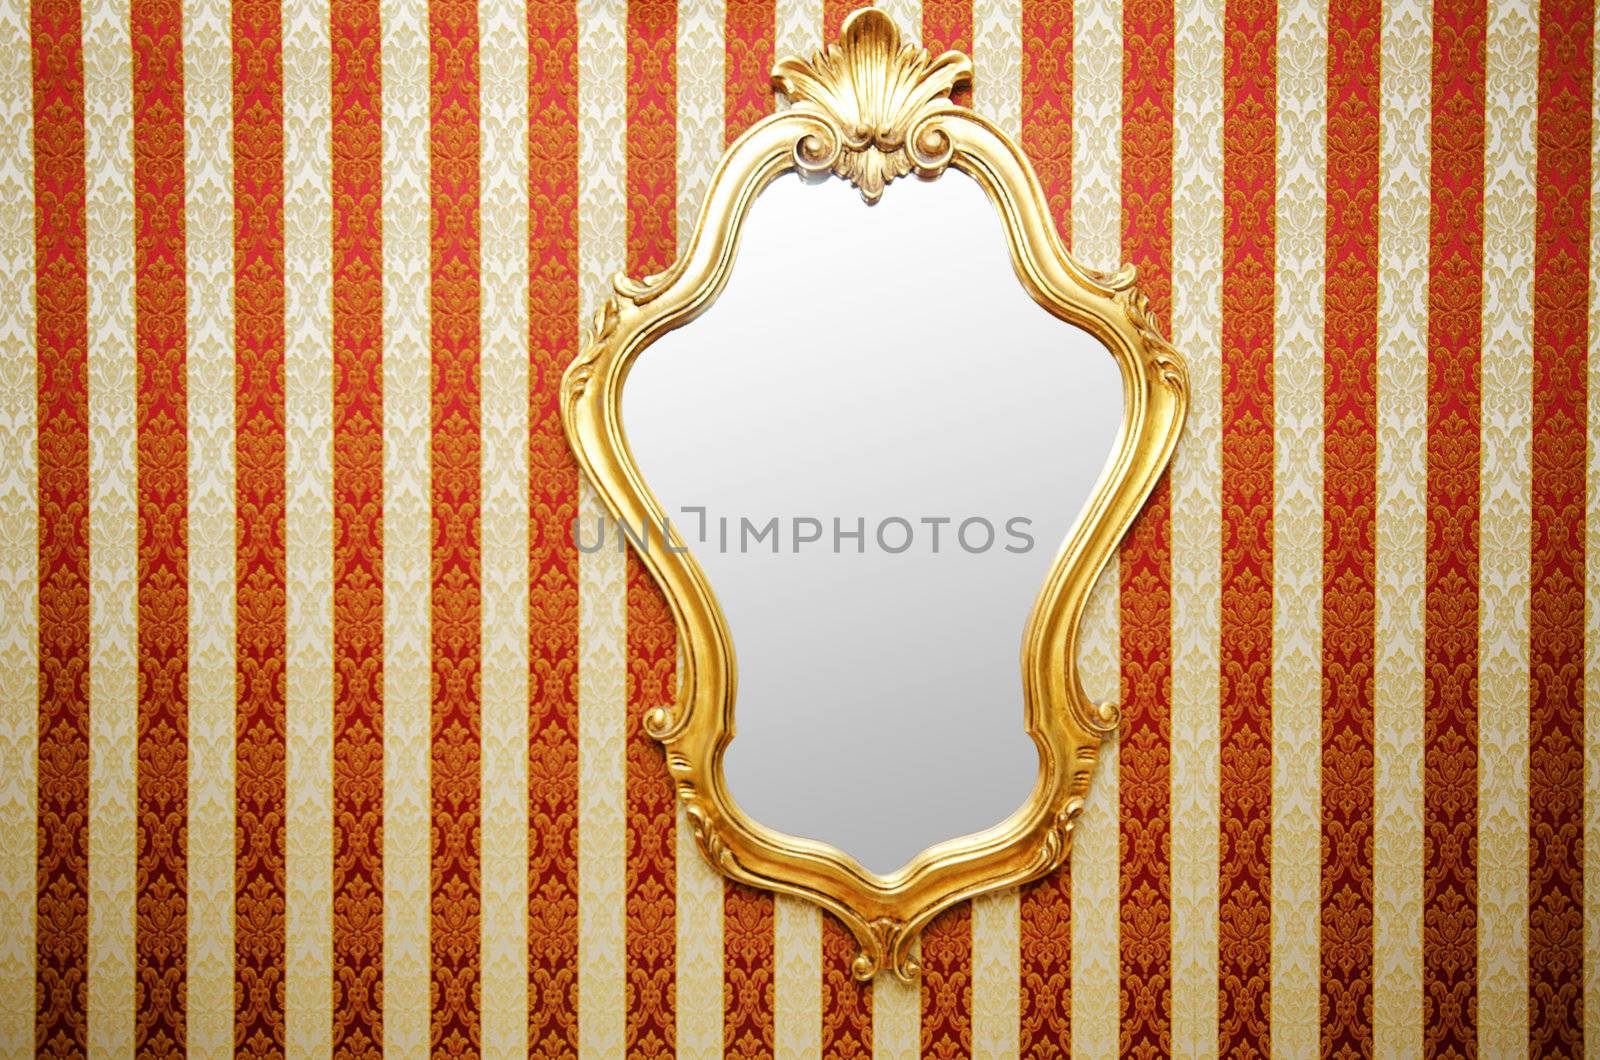 Ornate mirror on the wall by Elnur